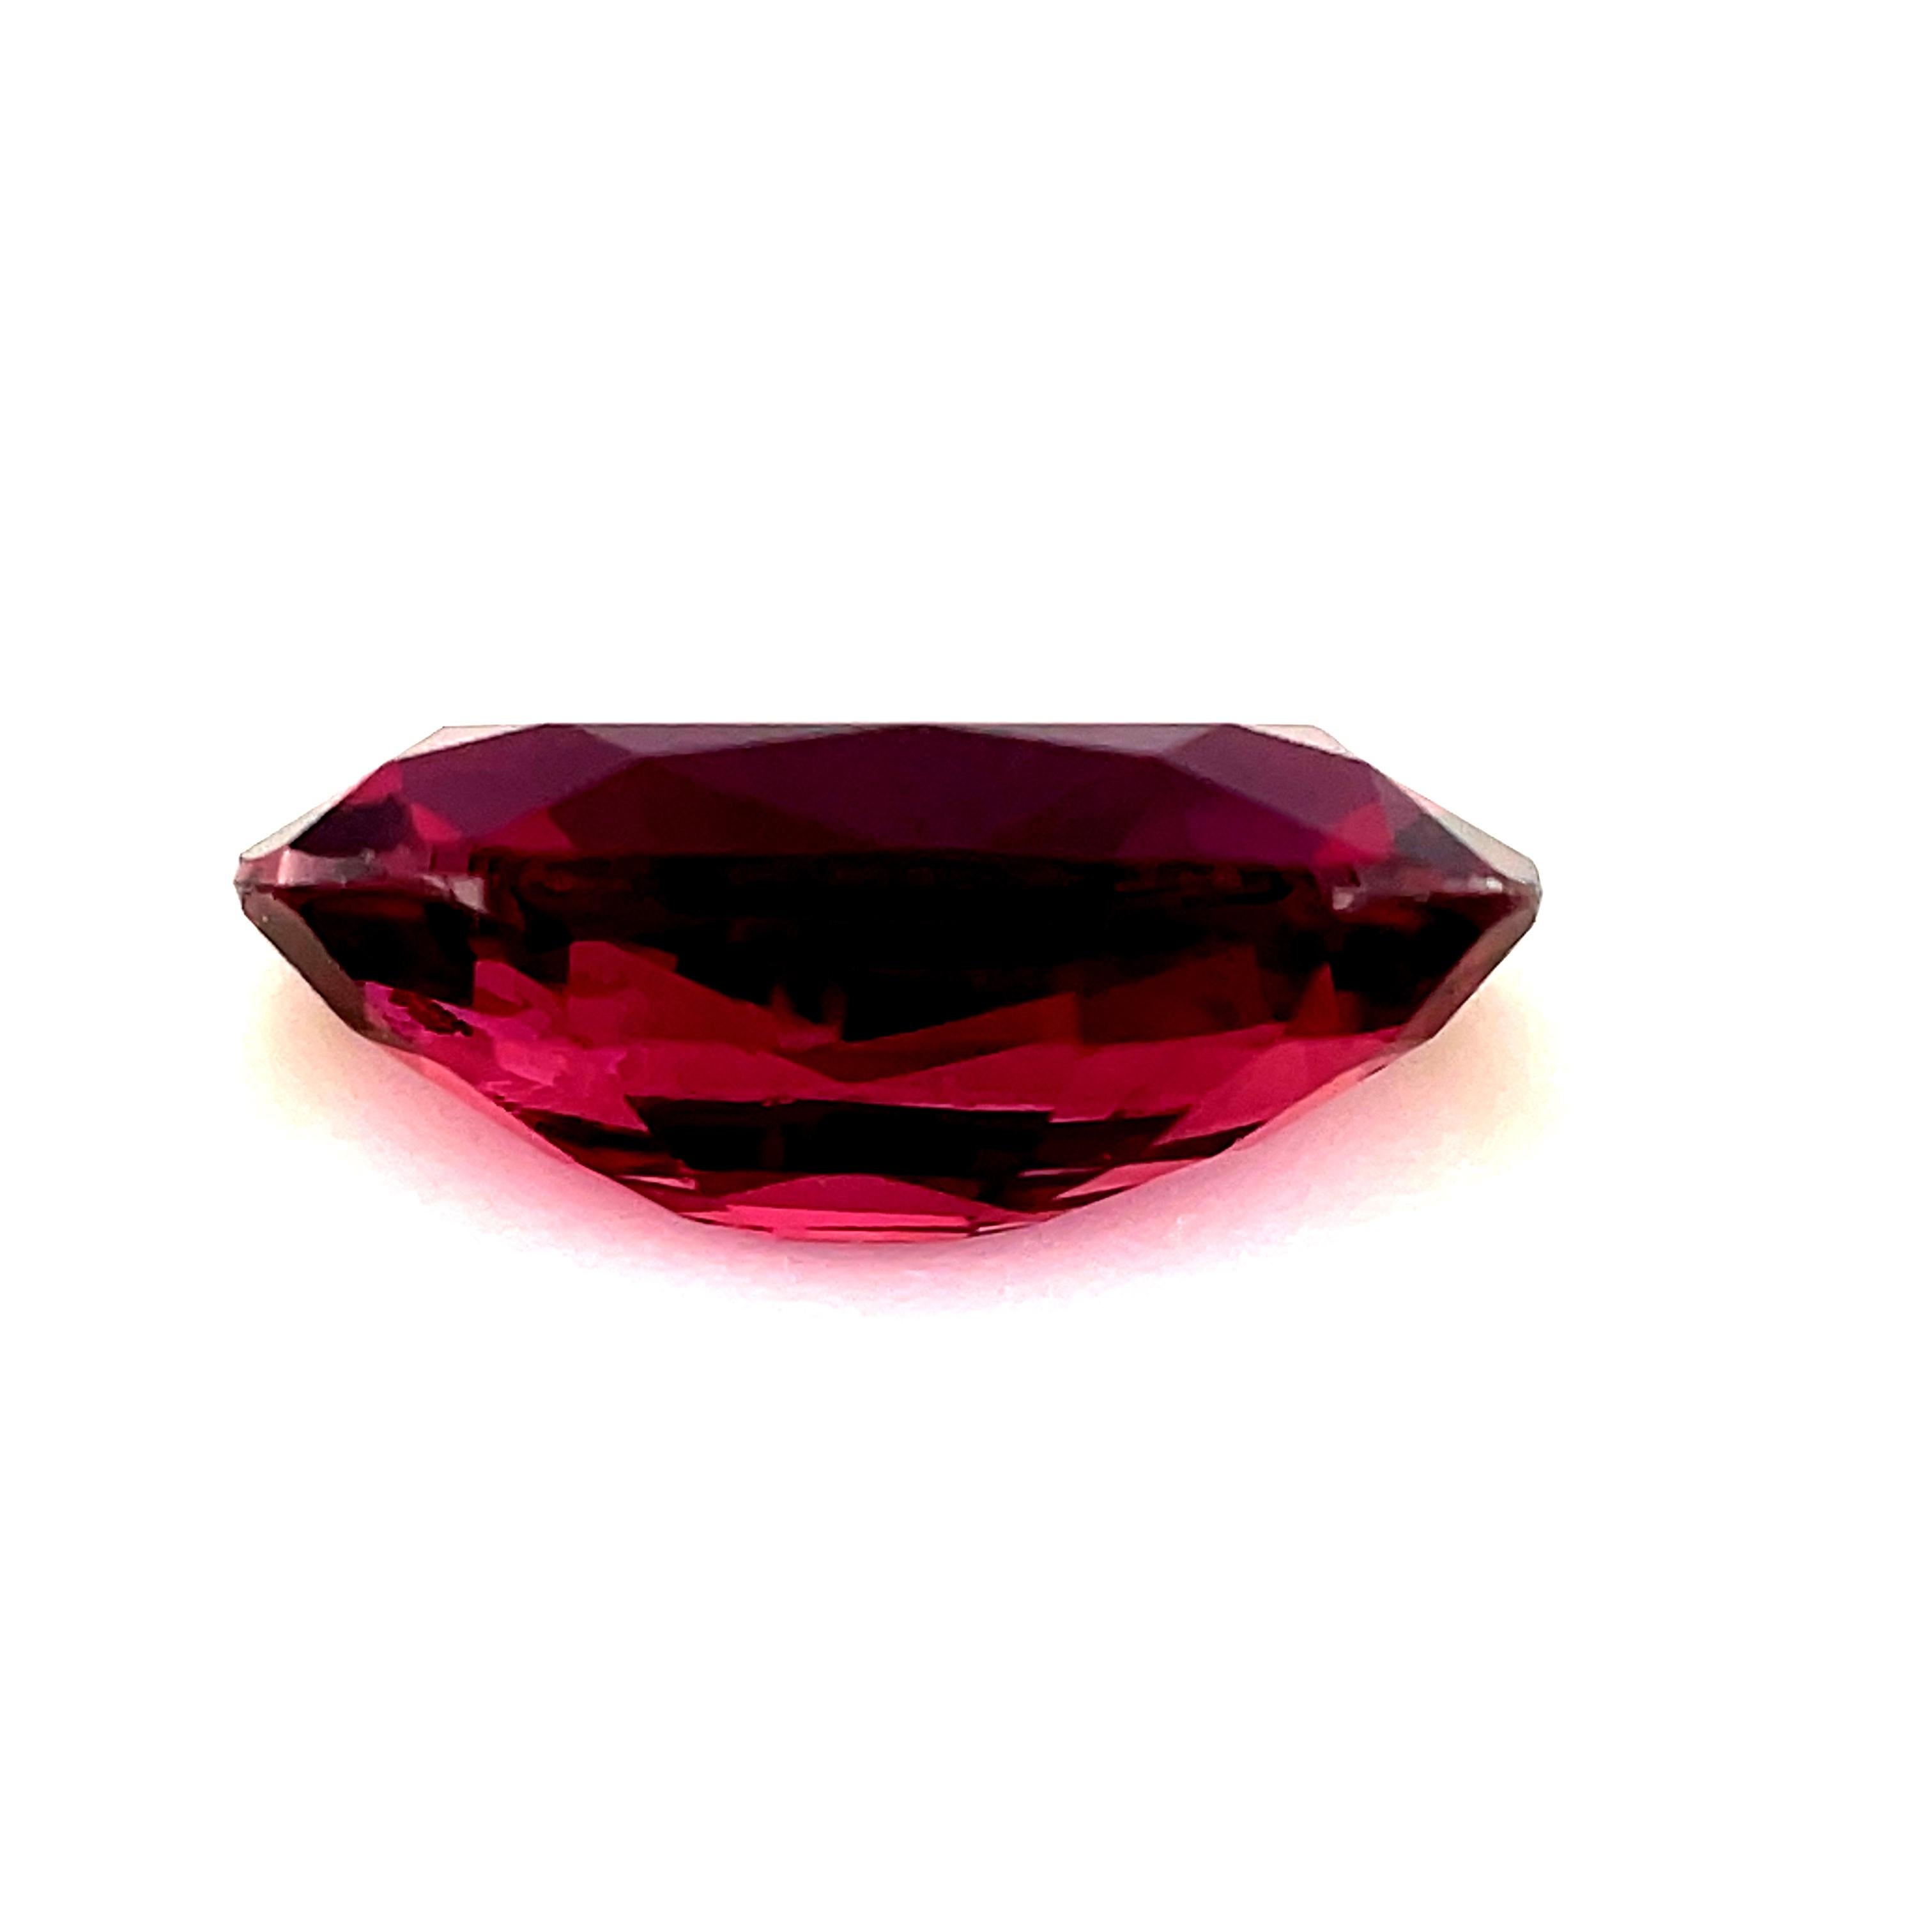 Loose Ruby Gemstone for Engagement or 3-Stone Ring, 1.46 Carat Oval  For Sale 2